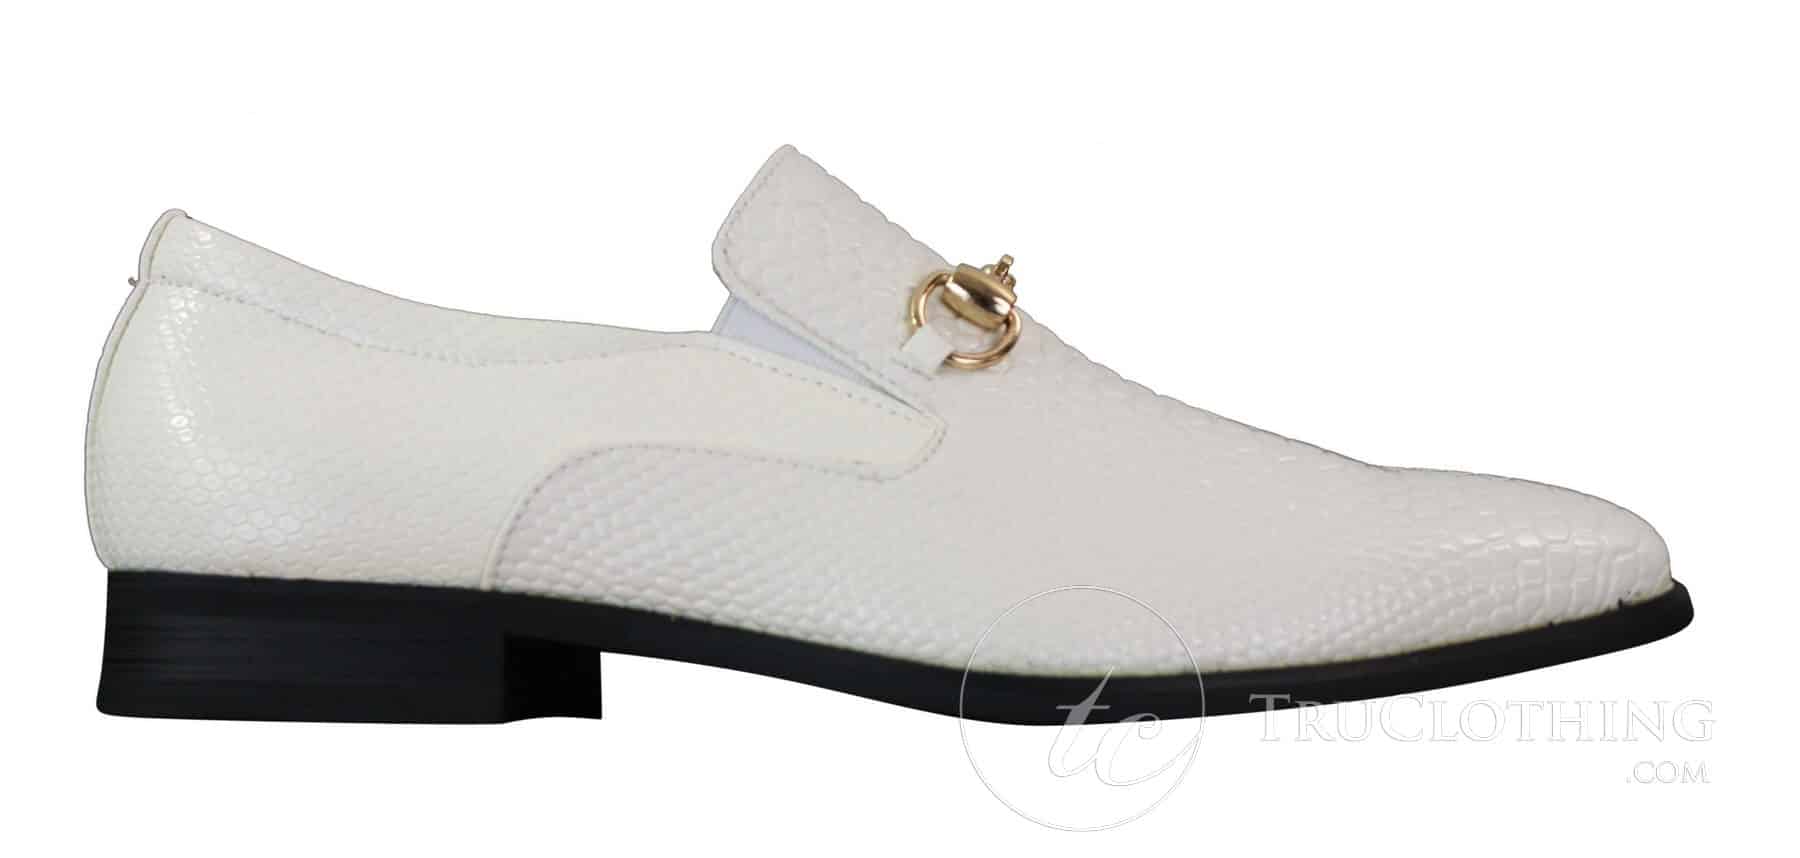 mens white shoes with gold buckle